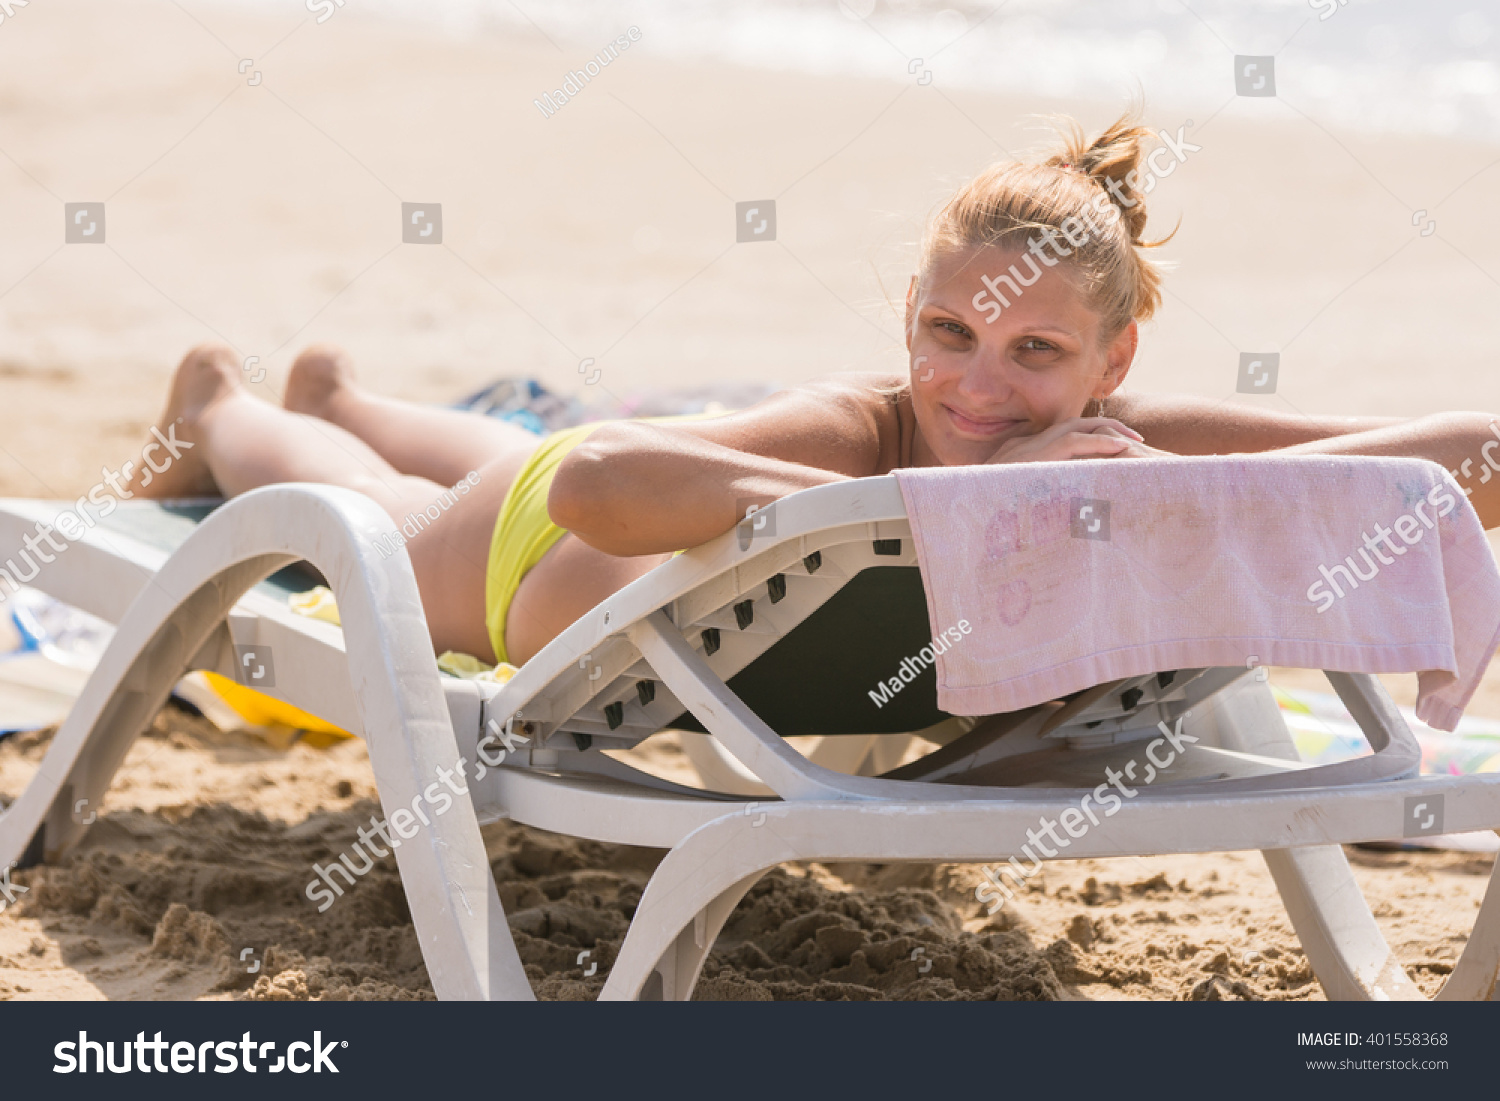 Young girl lying on a sun lounger on the beach with a smile looks in the frame #401558368